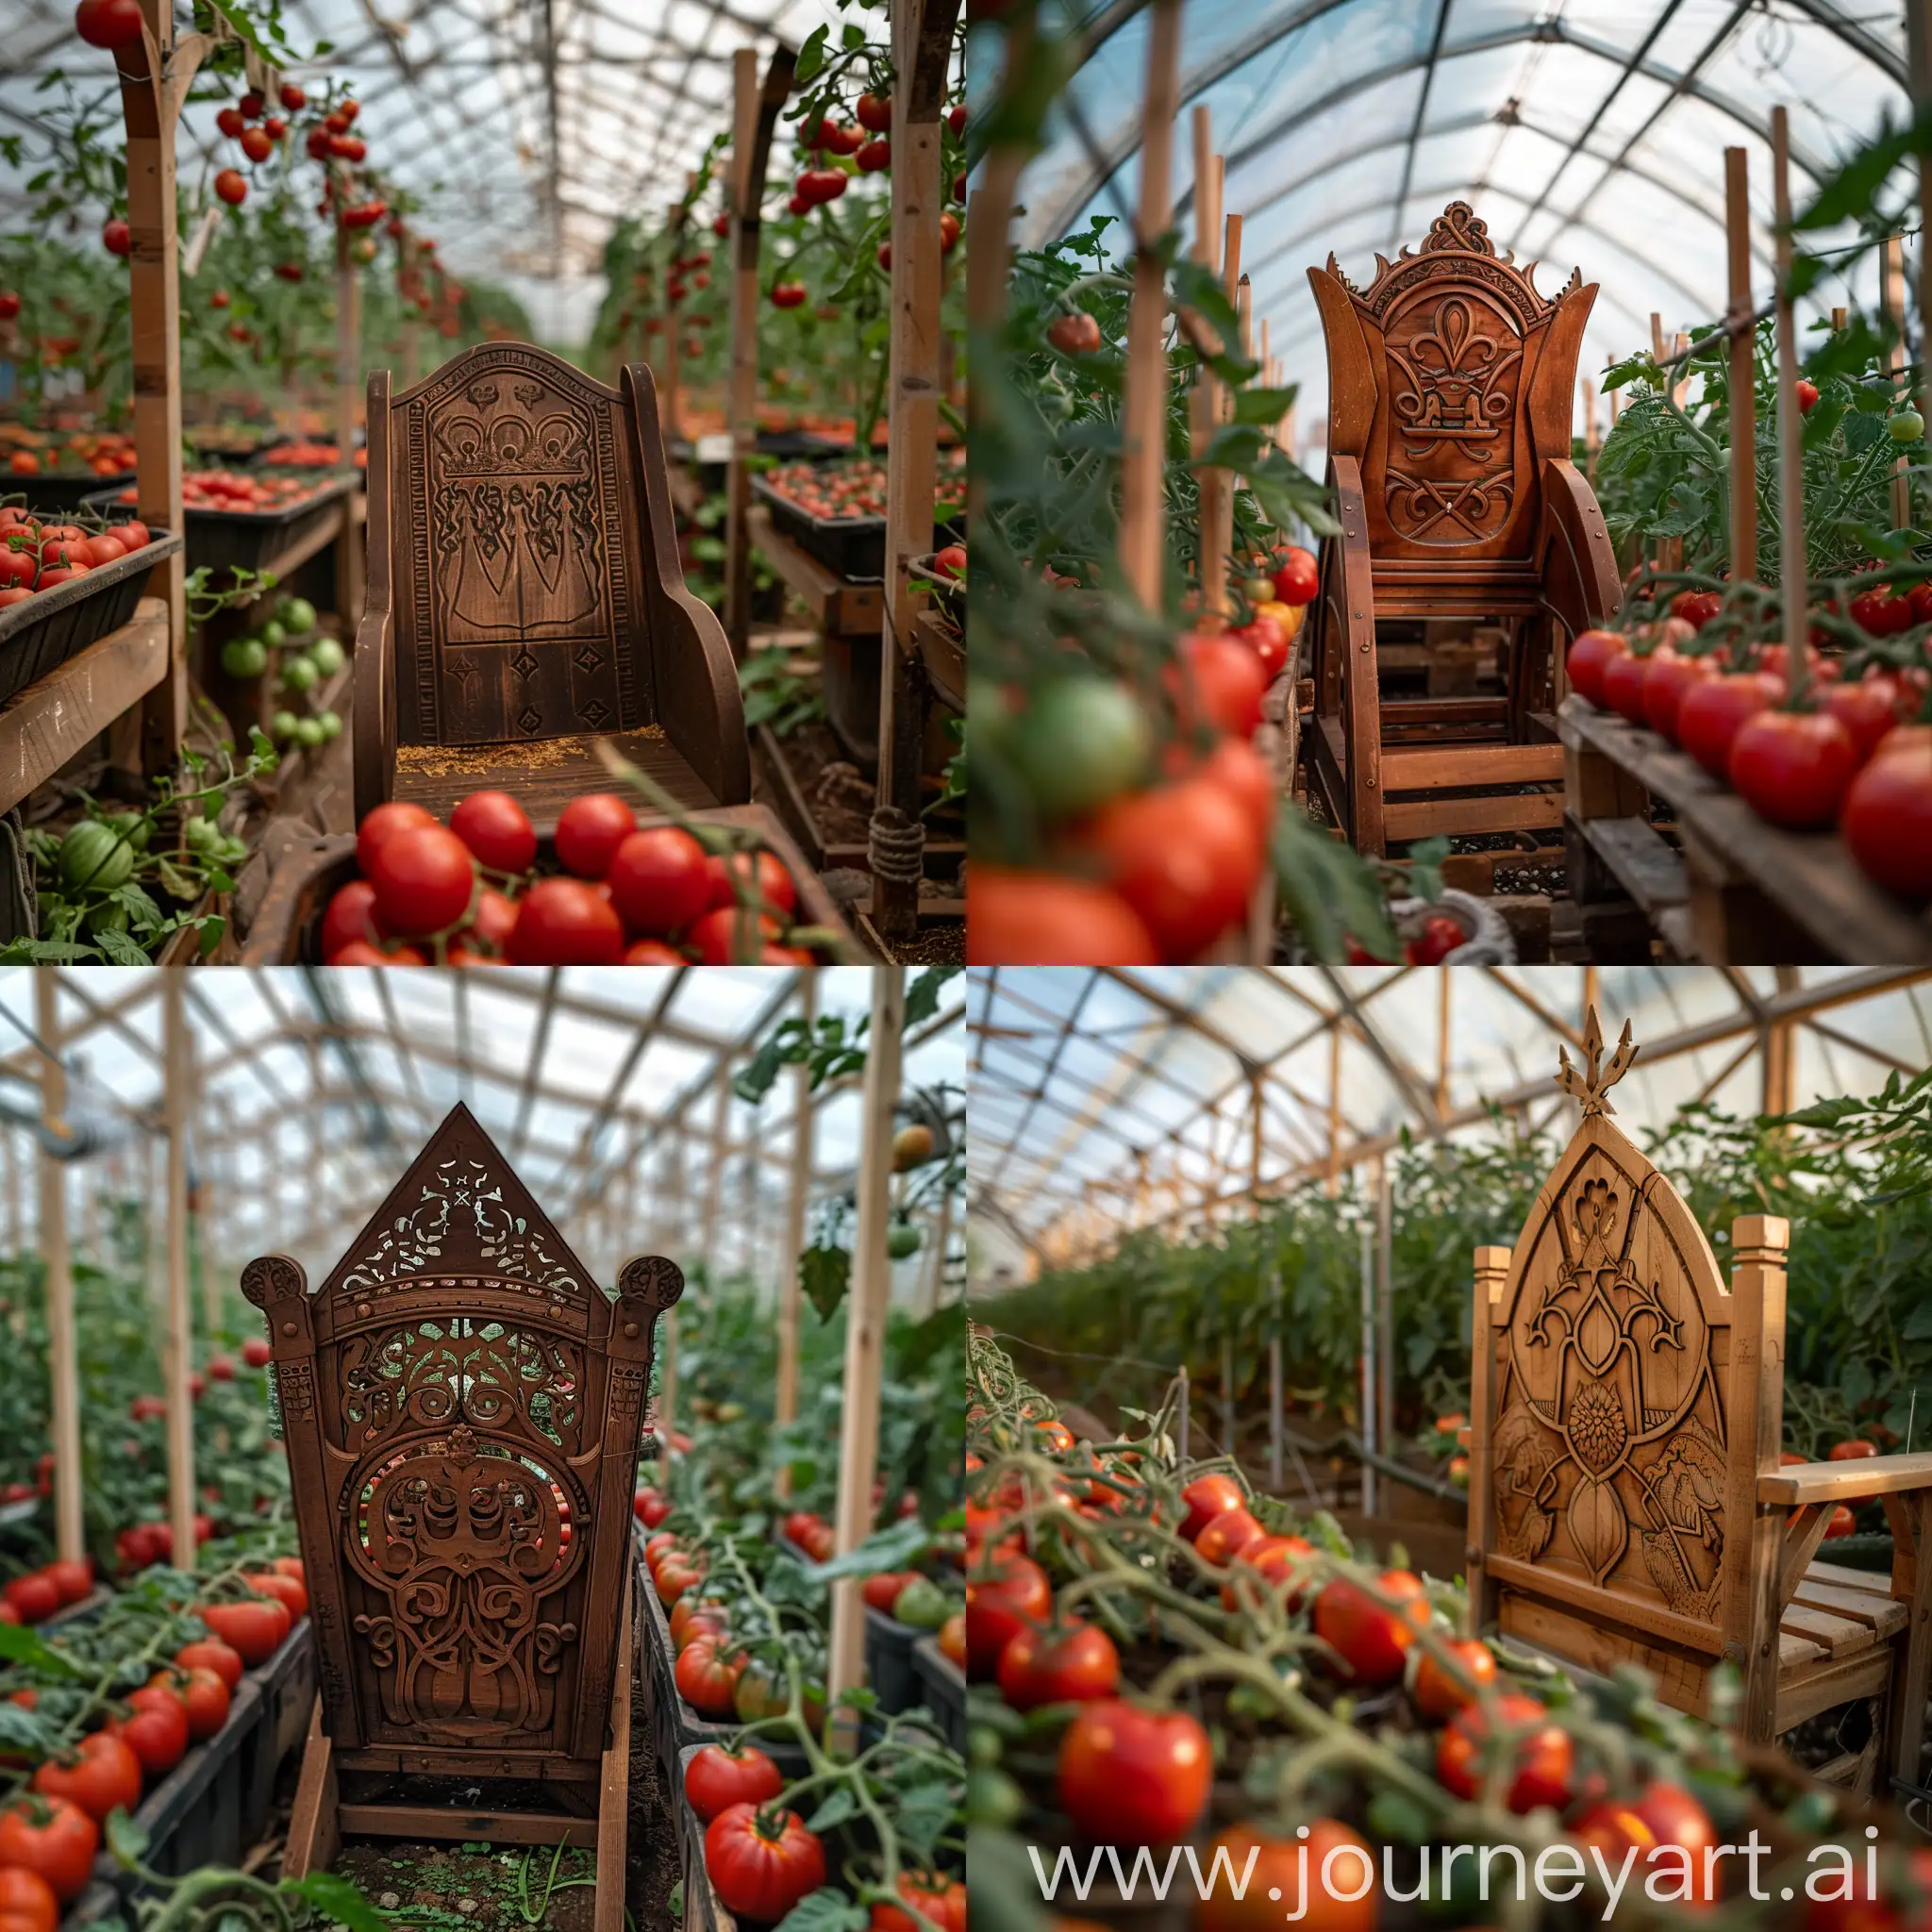 Greenhouse-Interior-with-Tomato-Plants-and-Wooden-Throne